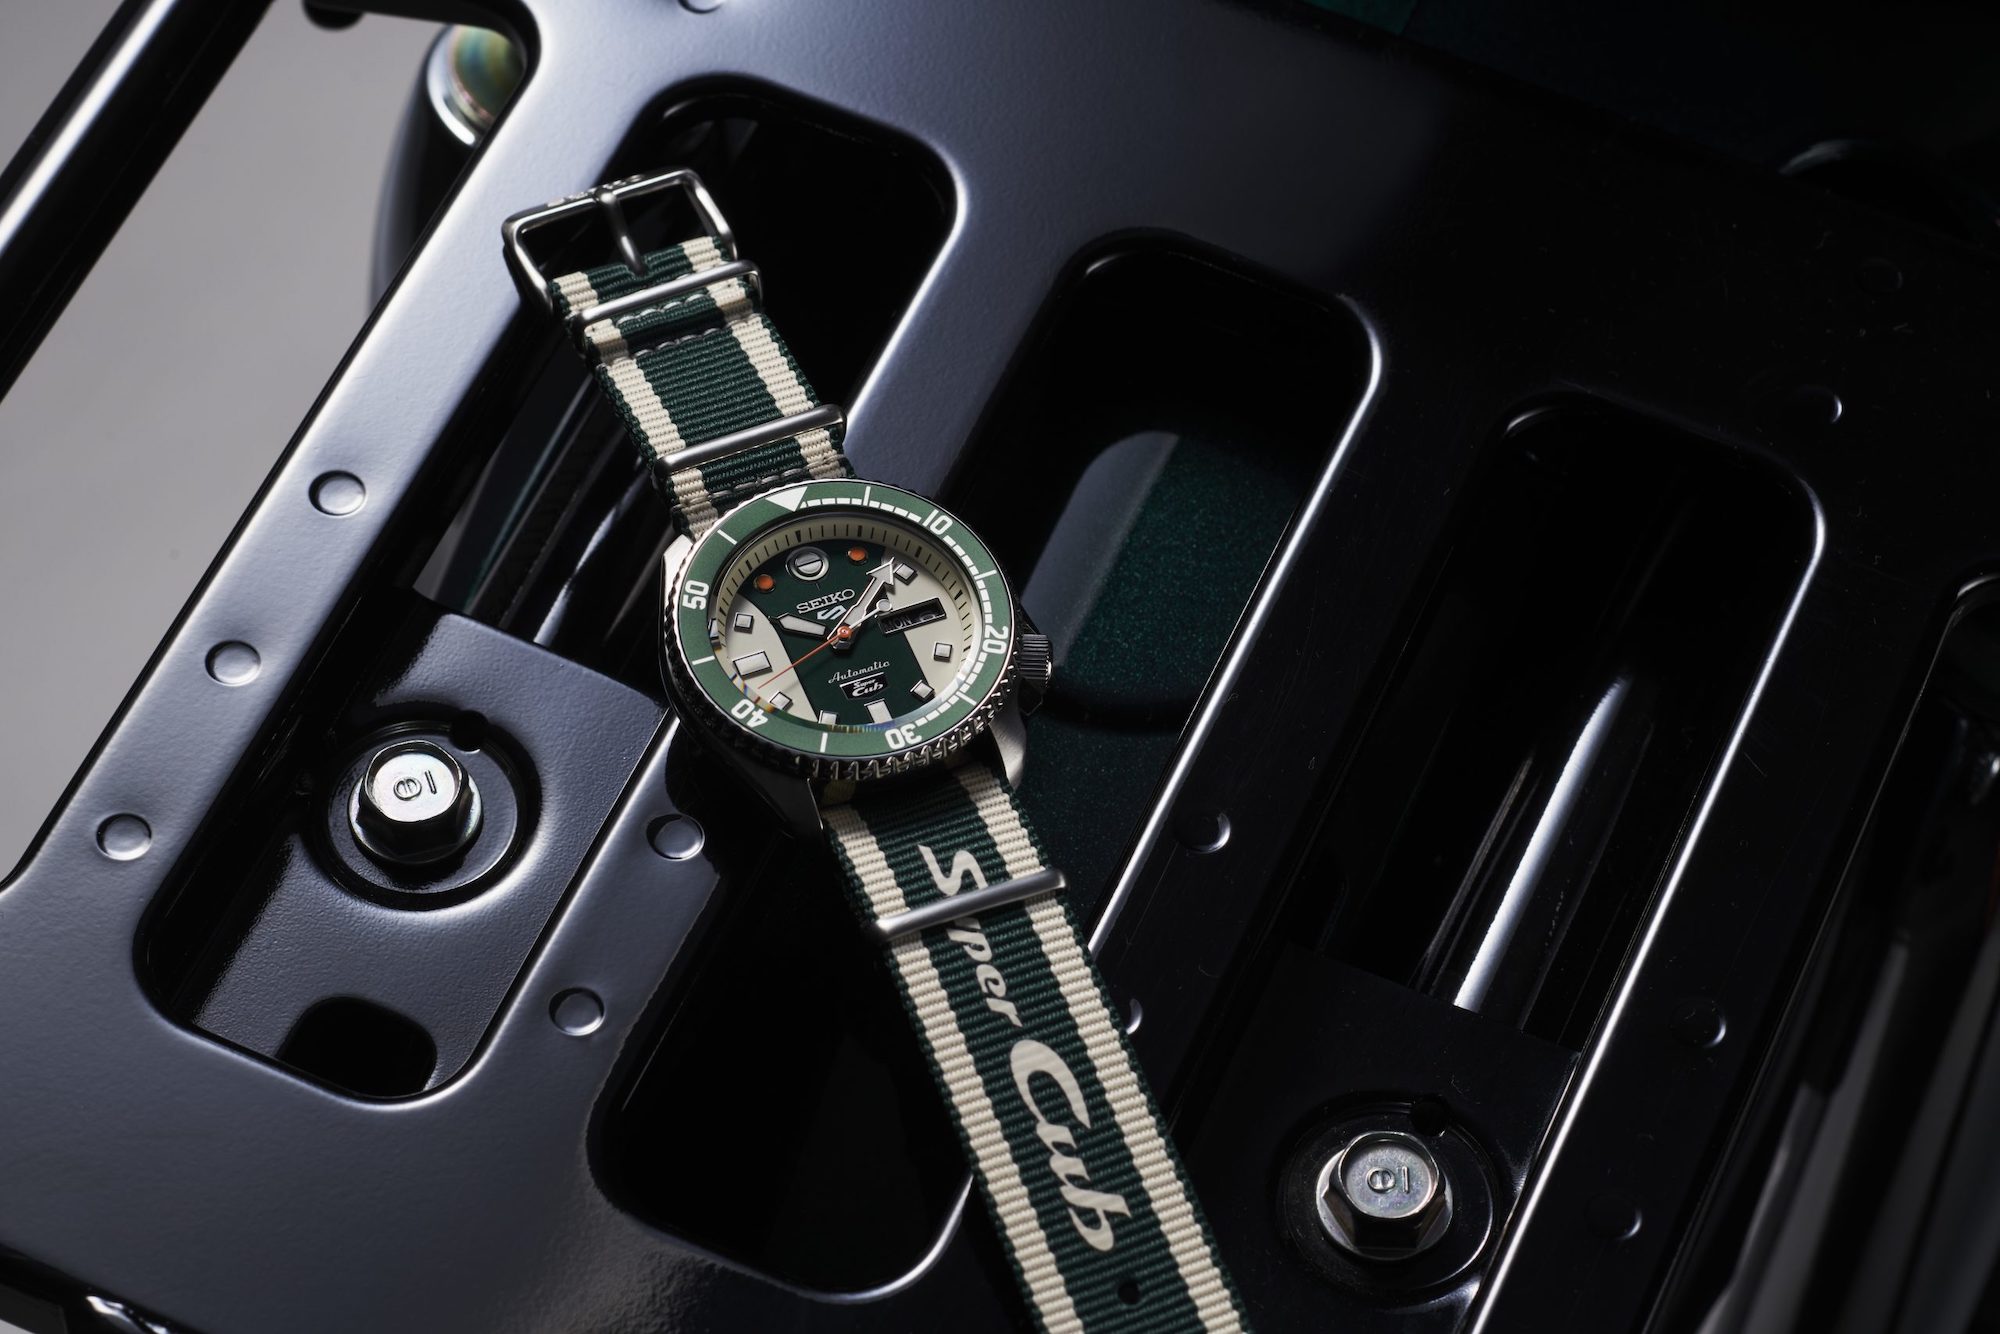 The Seiko 5 Sports Honda Super Cub Limited Edition Chronograph.  Media sourced from Seiko Watches. 